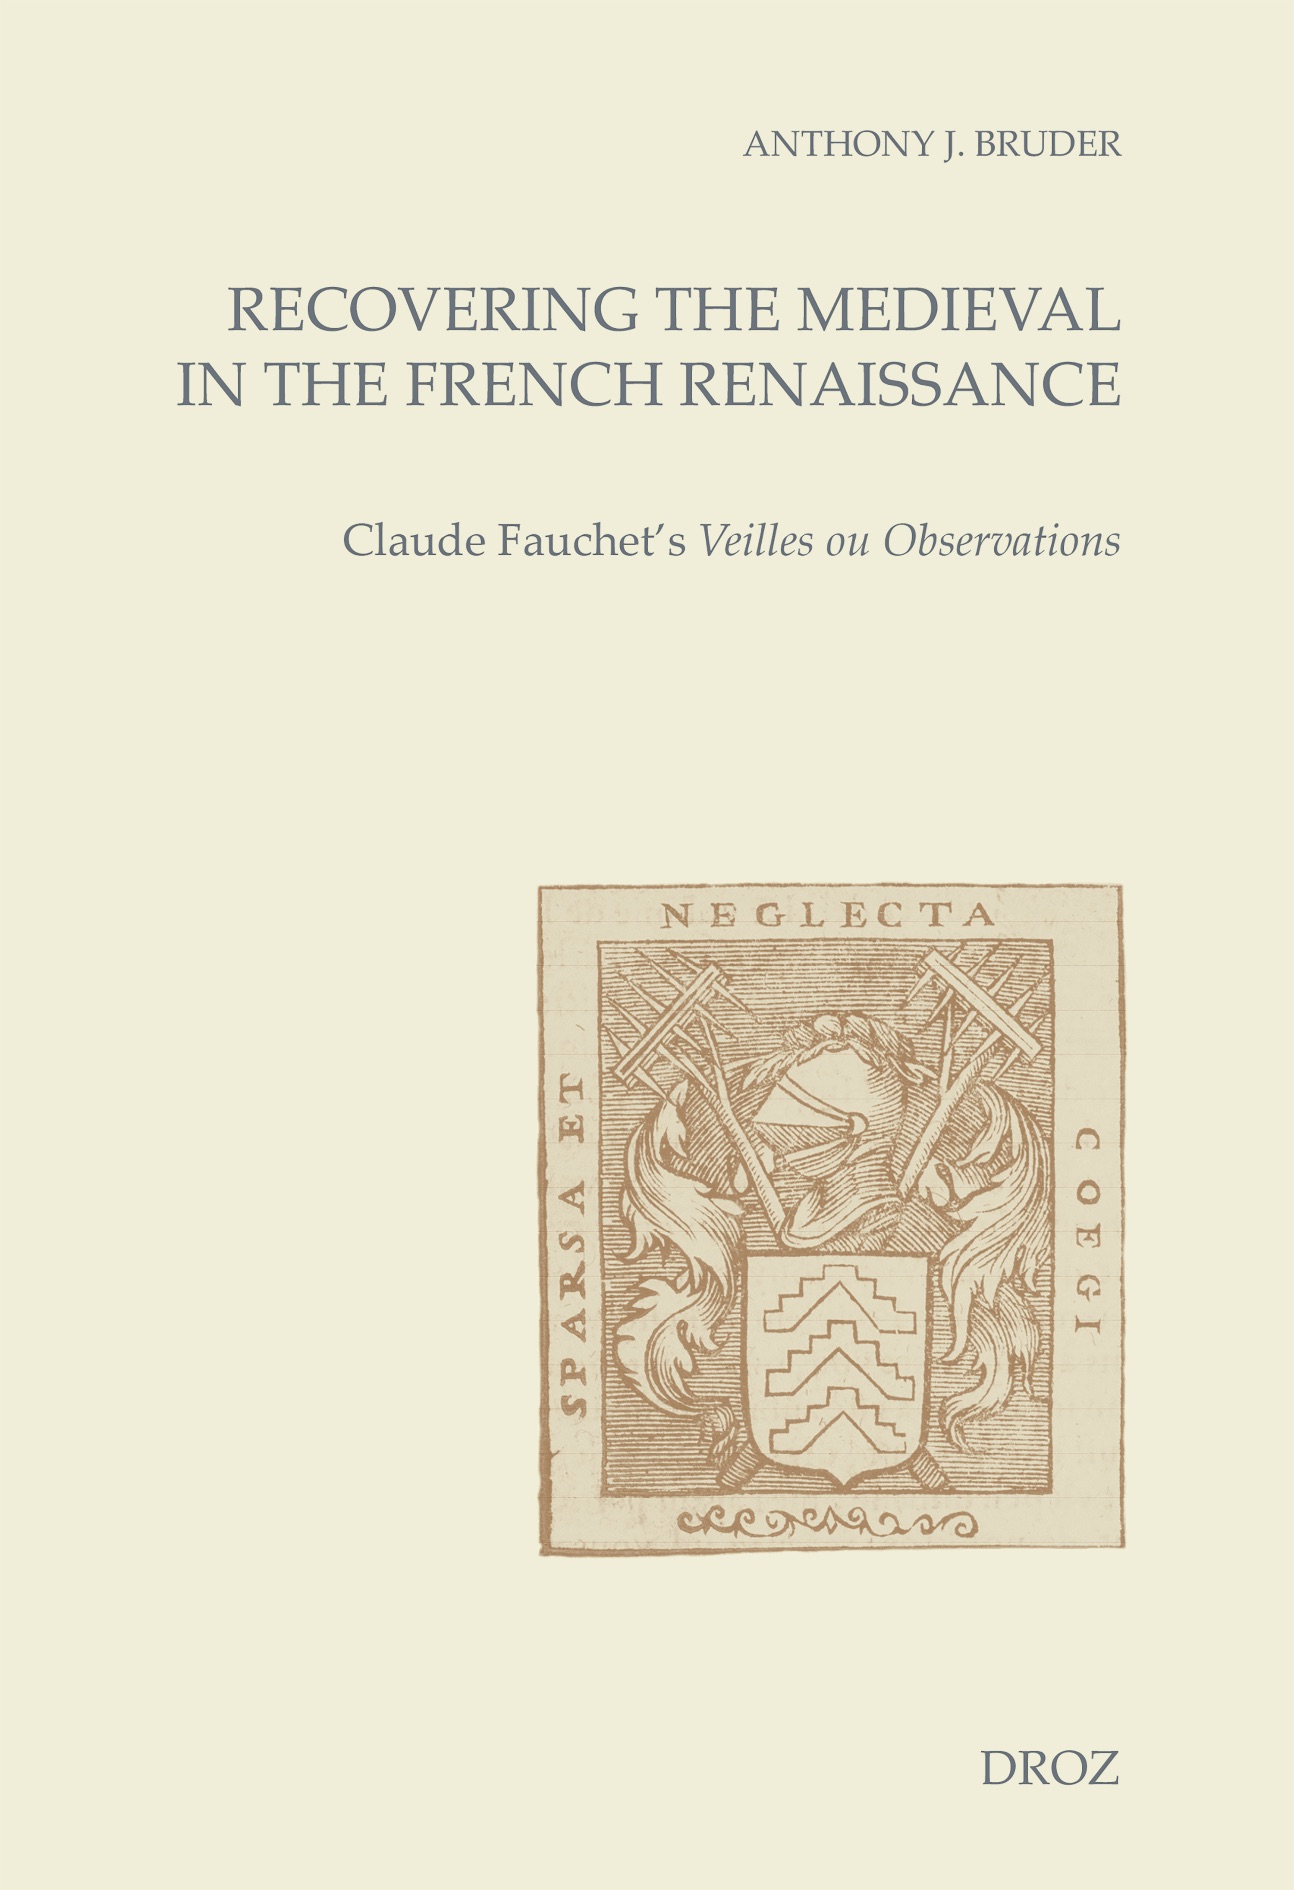 Anthony J. Bruder, Recovering the Medieval in the French Renaissance. Claude Fauchet's Veilles ou Observations